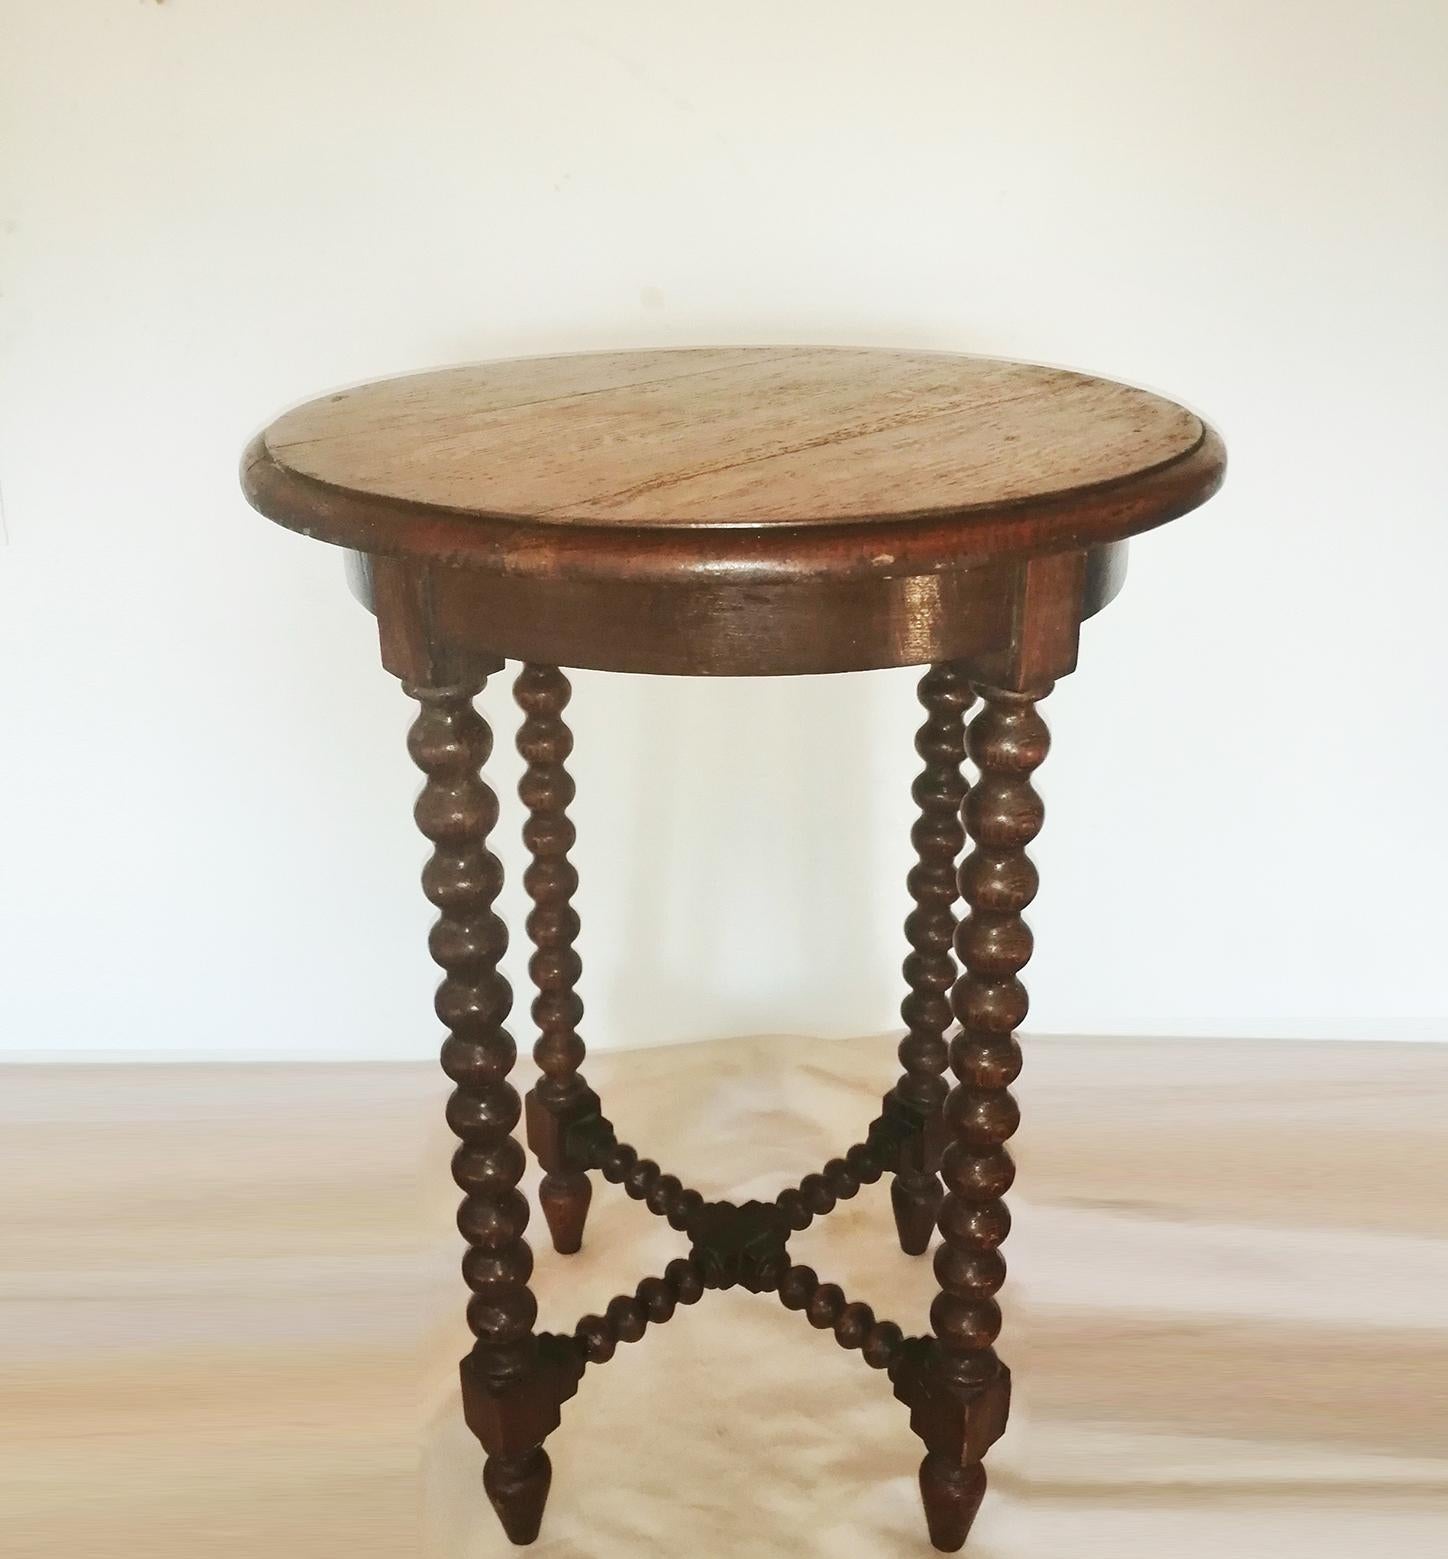 This Precious piece ready to be shipped

This table is raised on a base composed of four turned legs and a cross-shaped stretcher, also turned 

With his patina, which shows the age of the piece, and its elegant lines

they are in very , very good